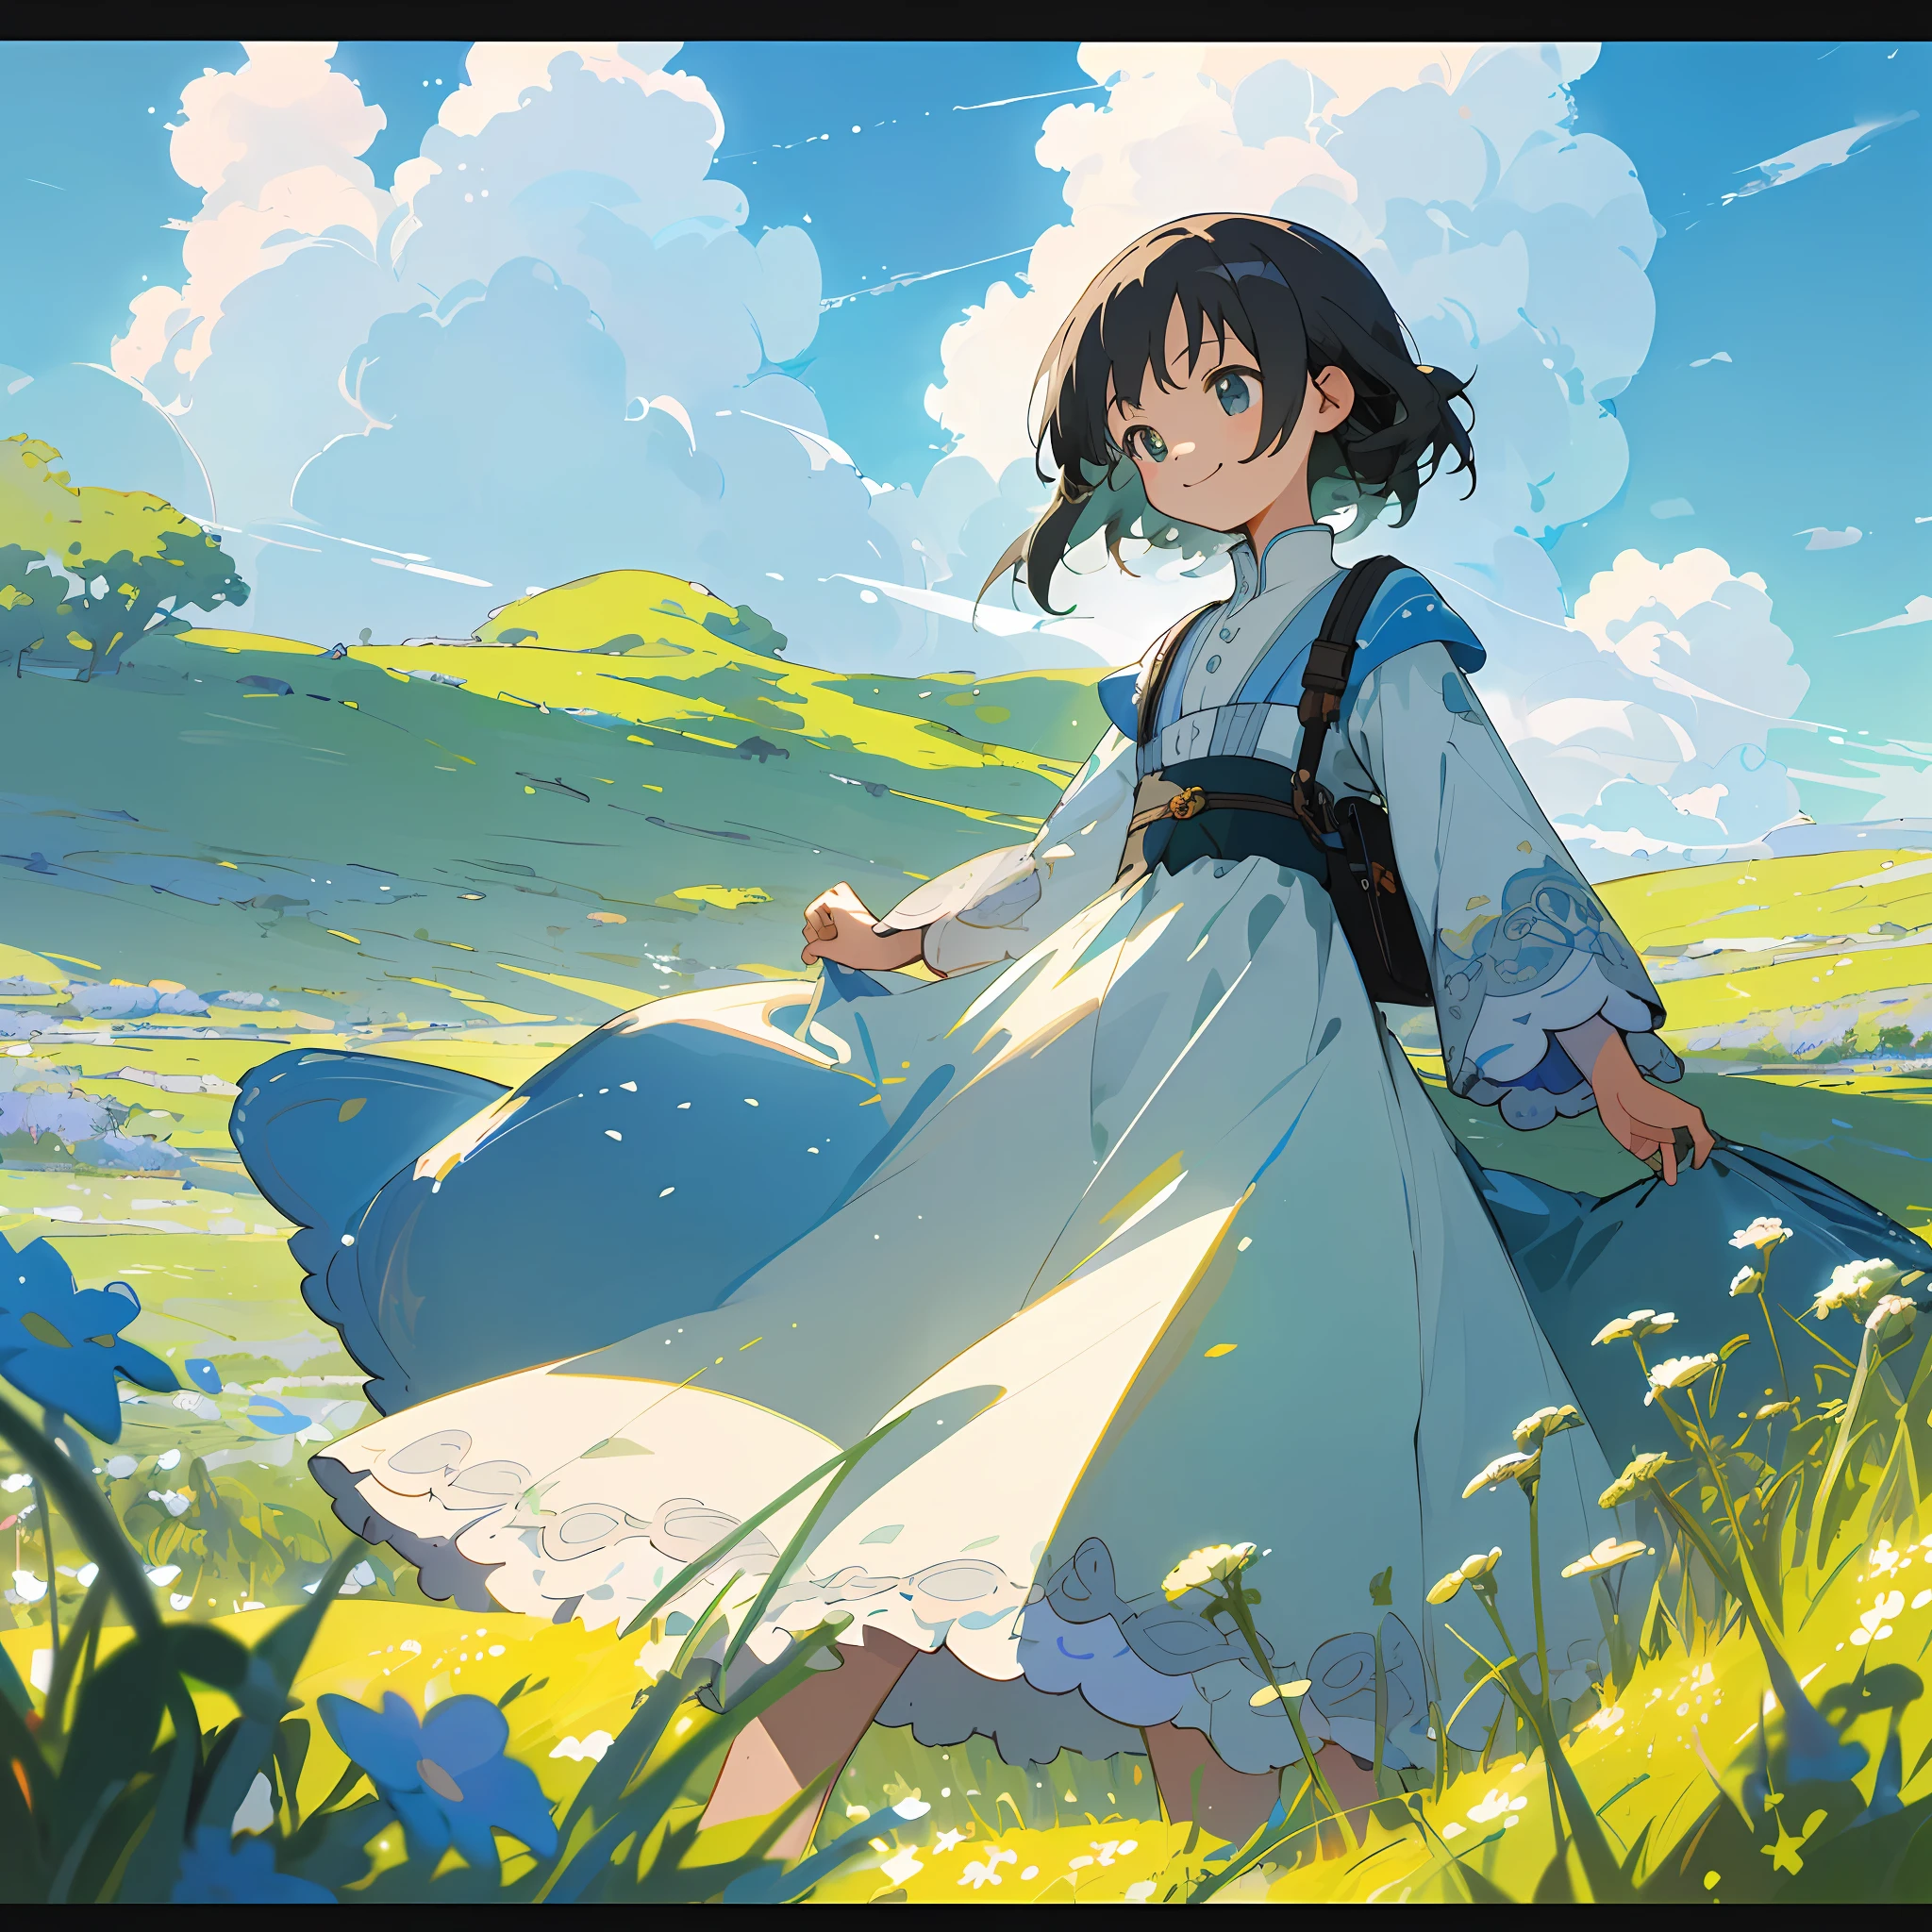 ((masterpiece, best quality, highest quality, illustration, intricate details)), blue sky, white clouds, meadow, 1 , bright smile, fresh style, fresh tone, rich color, high saturation, depth of field, outdoors, Miyazaki style